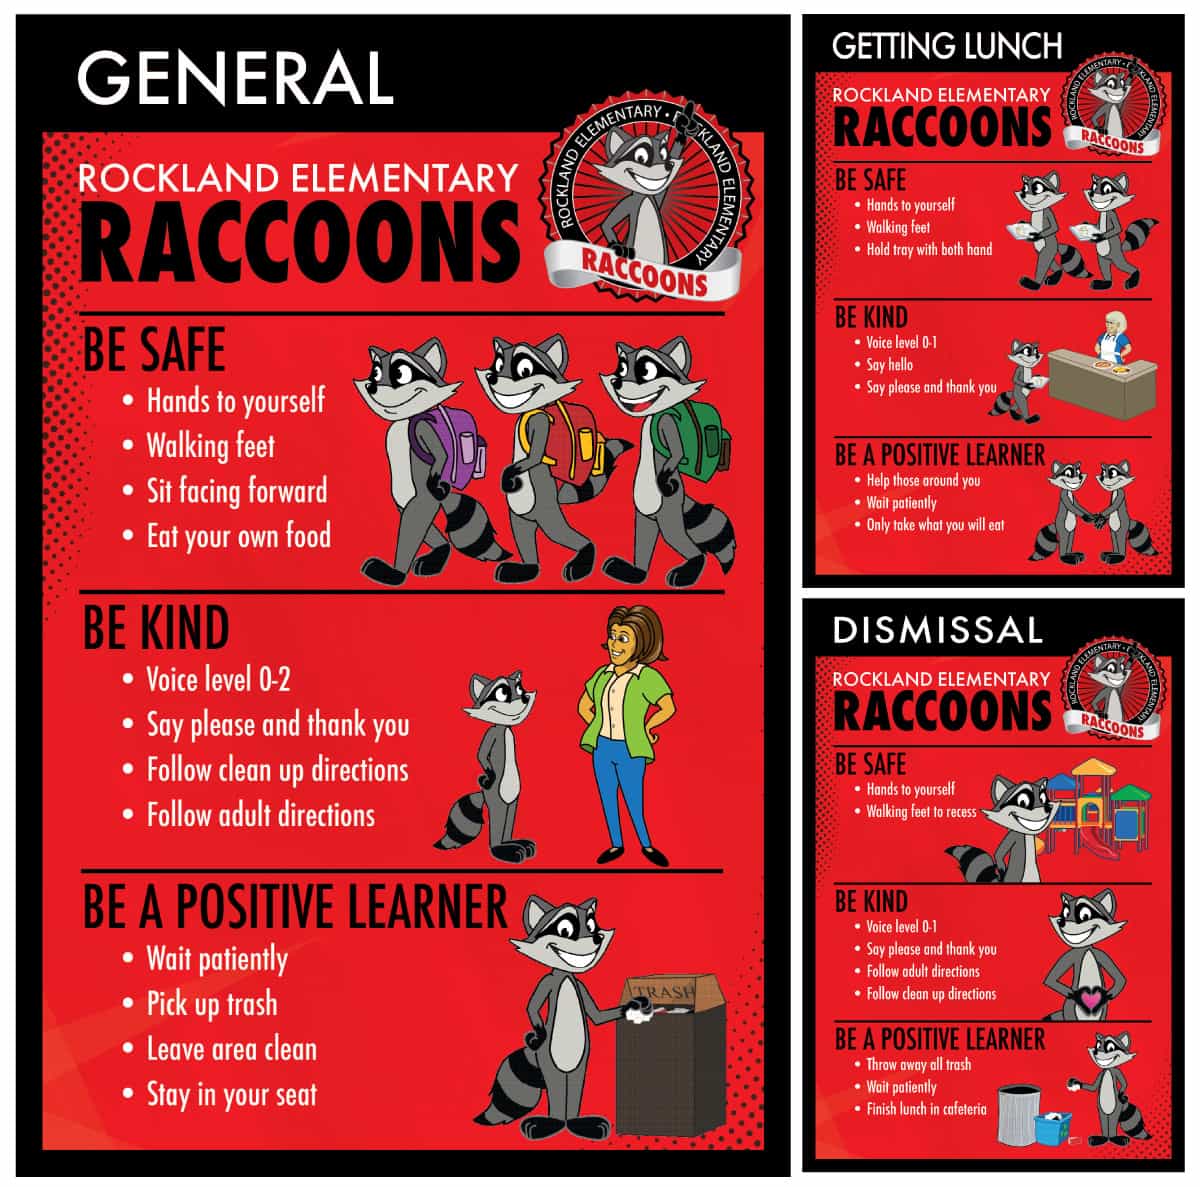 RULES-POSTER-RACCOON